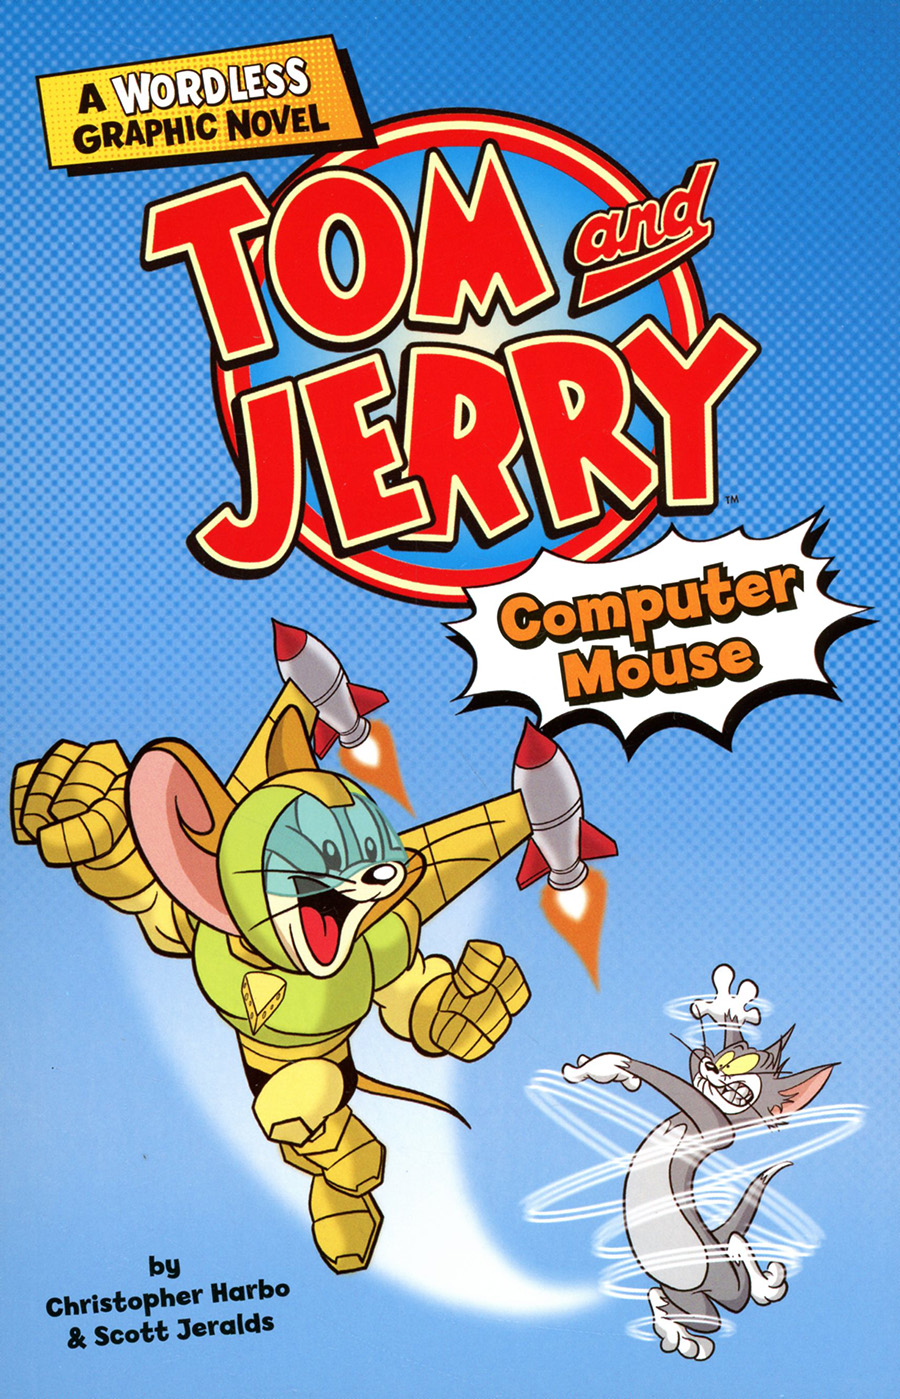 Tom And Jerry A Wordless Graphic Novel Computer Mouse TP